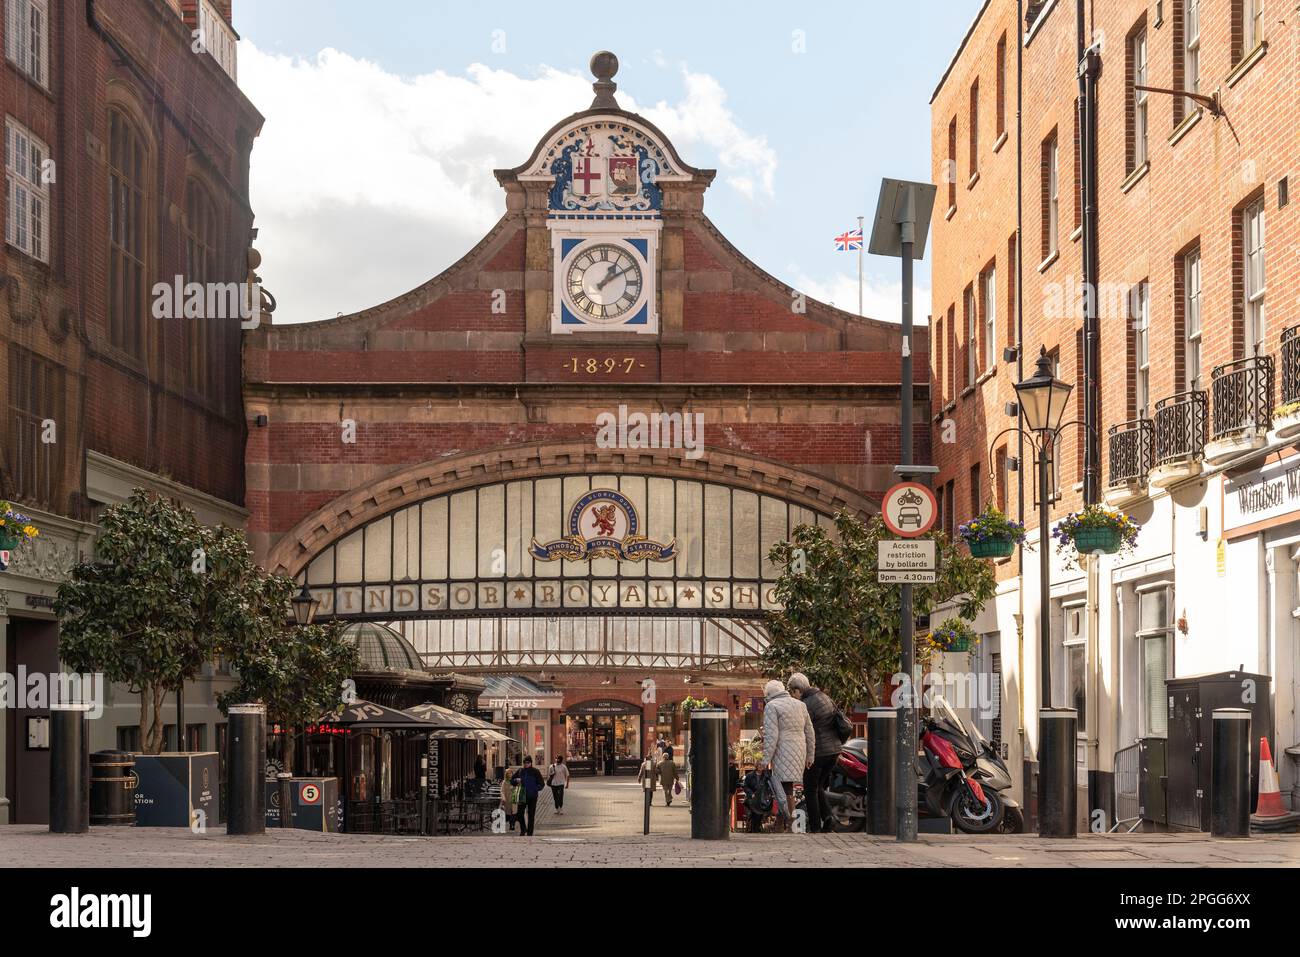 Windsor, Berkshire, England, UK. Entrance to the old railway station which is still in use with added shops and restaurants. Stock Photo